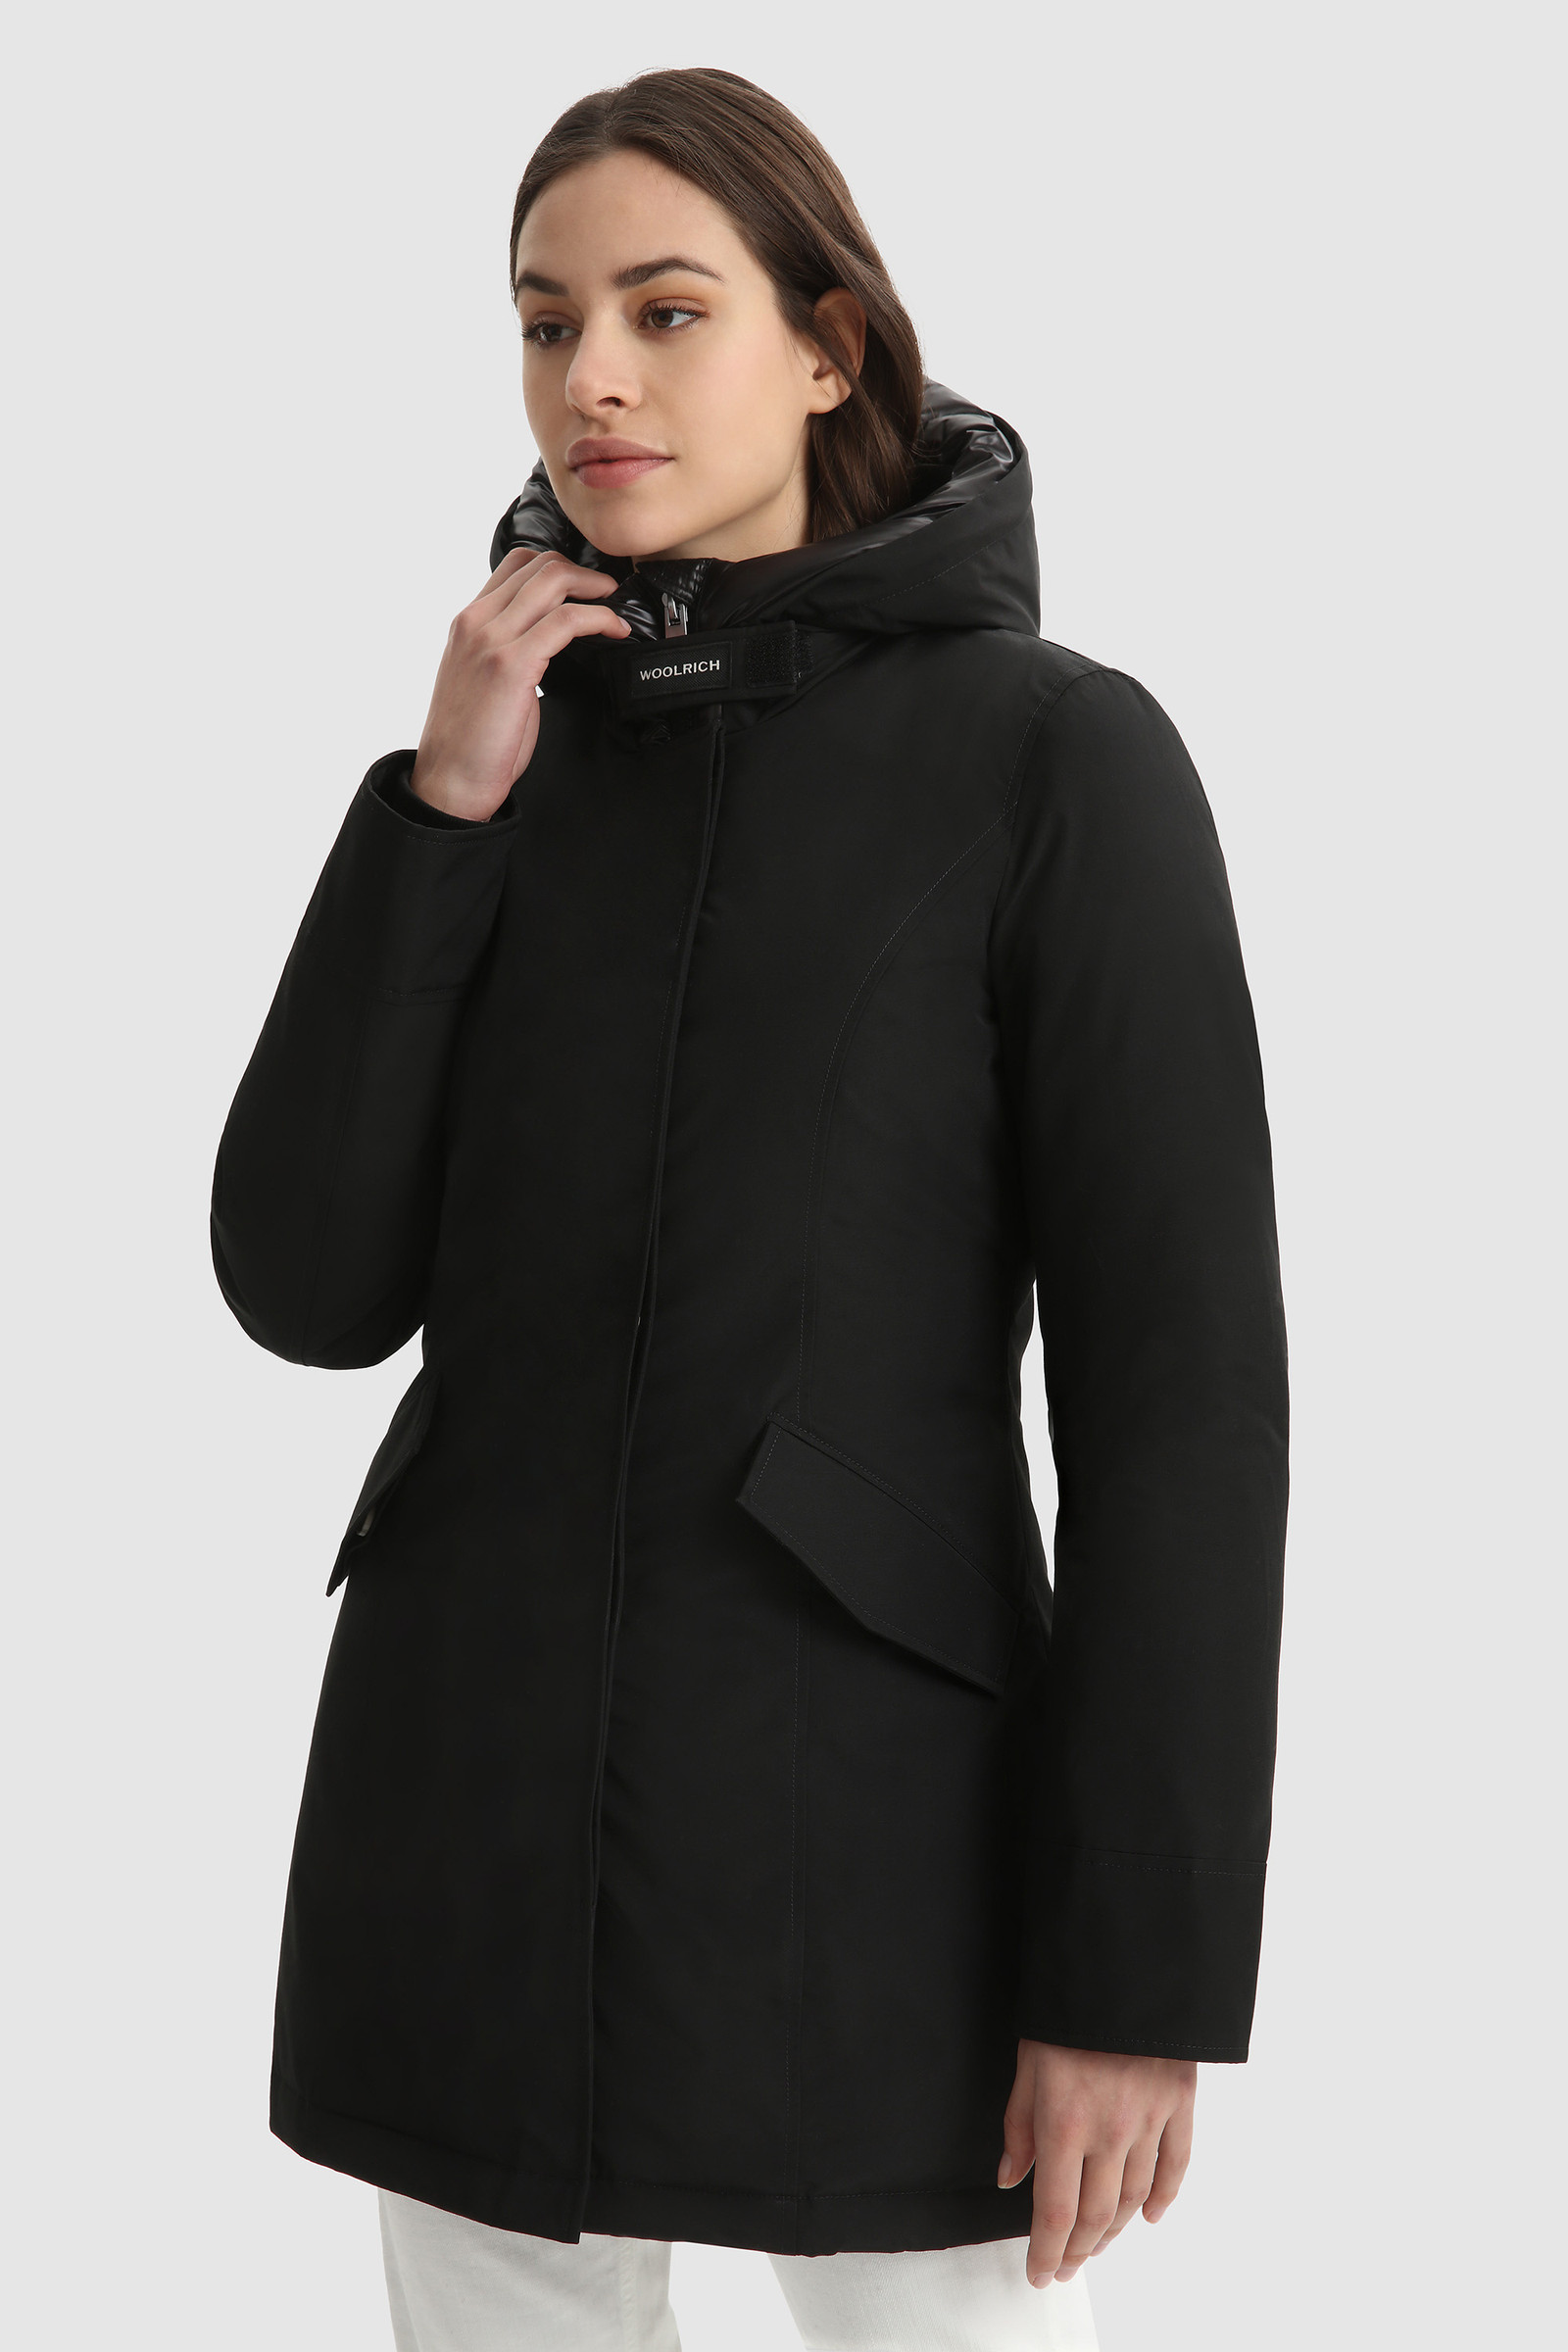 Fighter Marco Polo mad Women's Arctic Parka Black | Woolrich